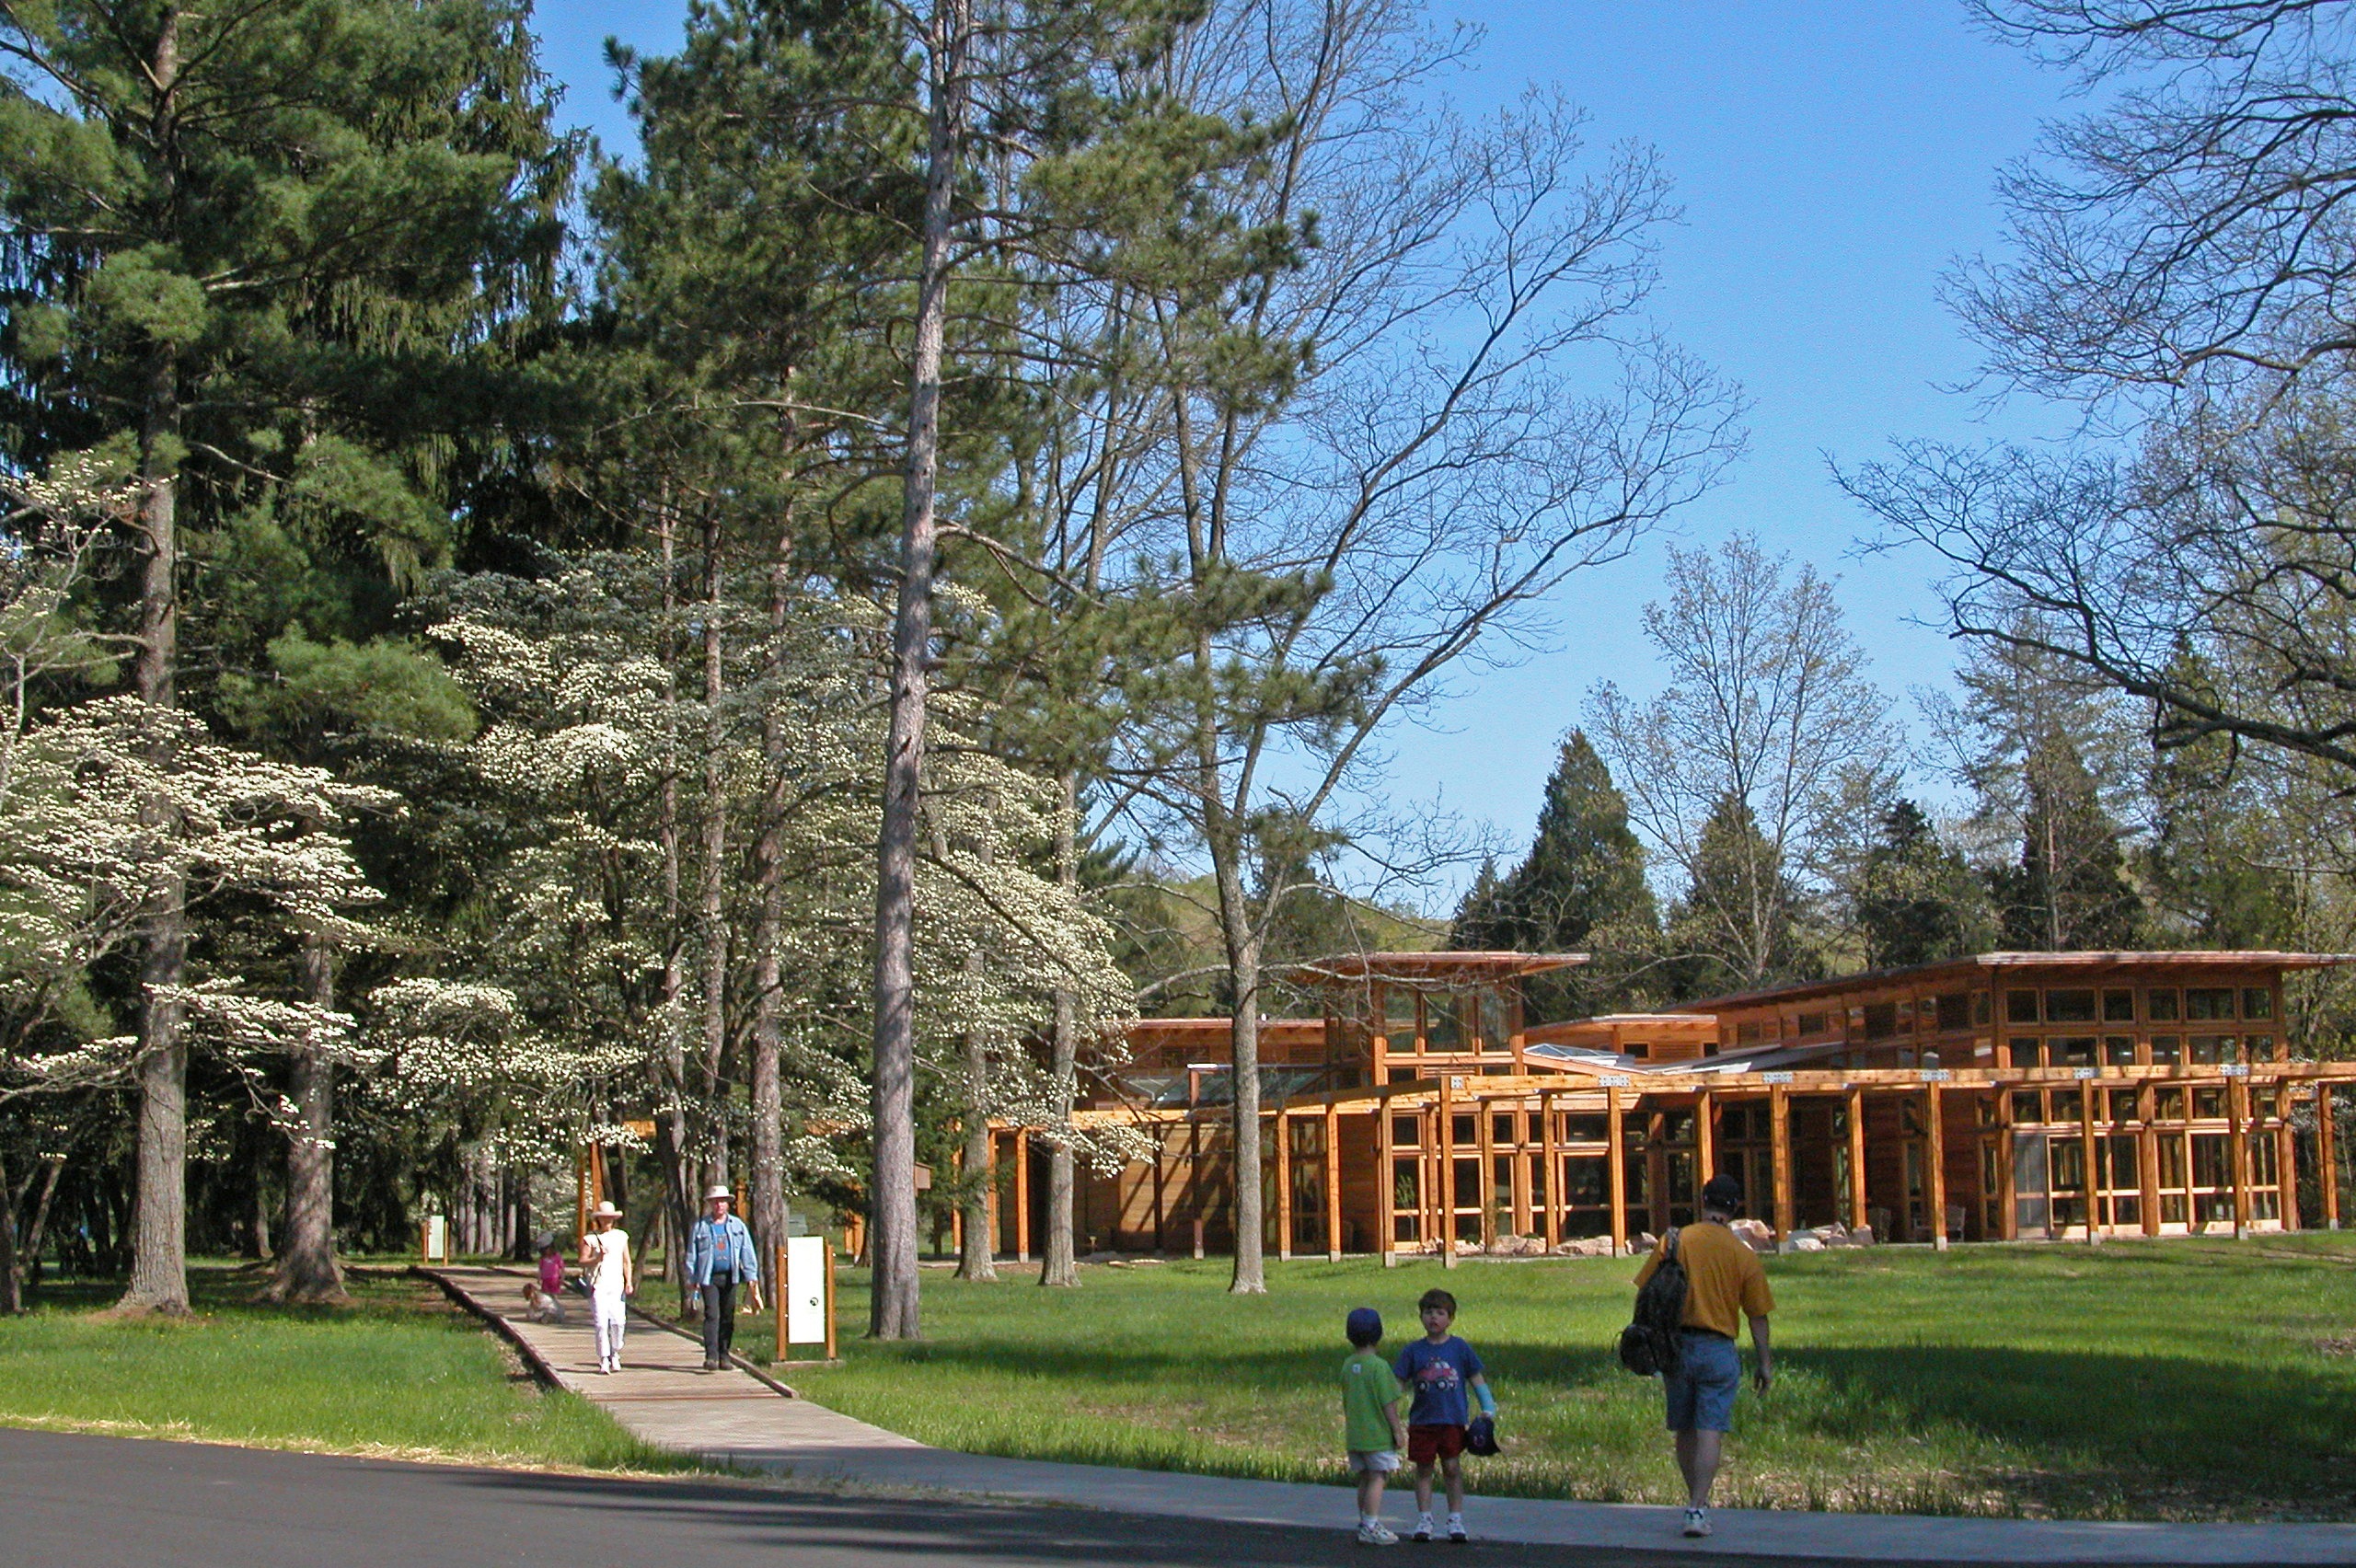 People in the foreground walking around Welcome Center at Bernheim Forest